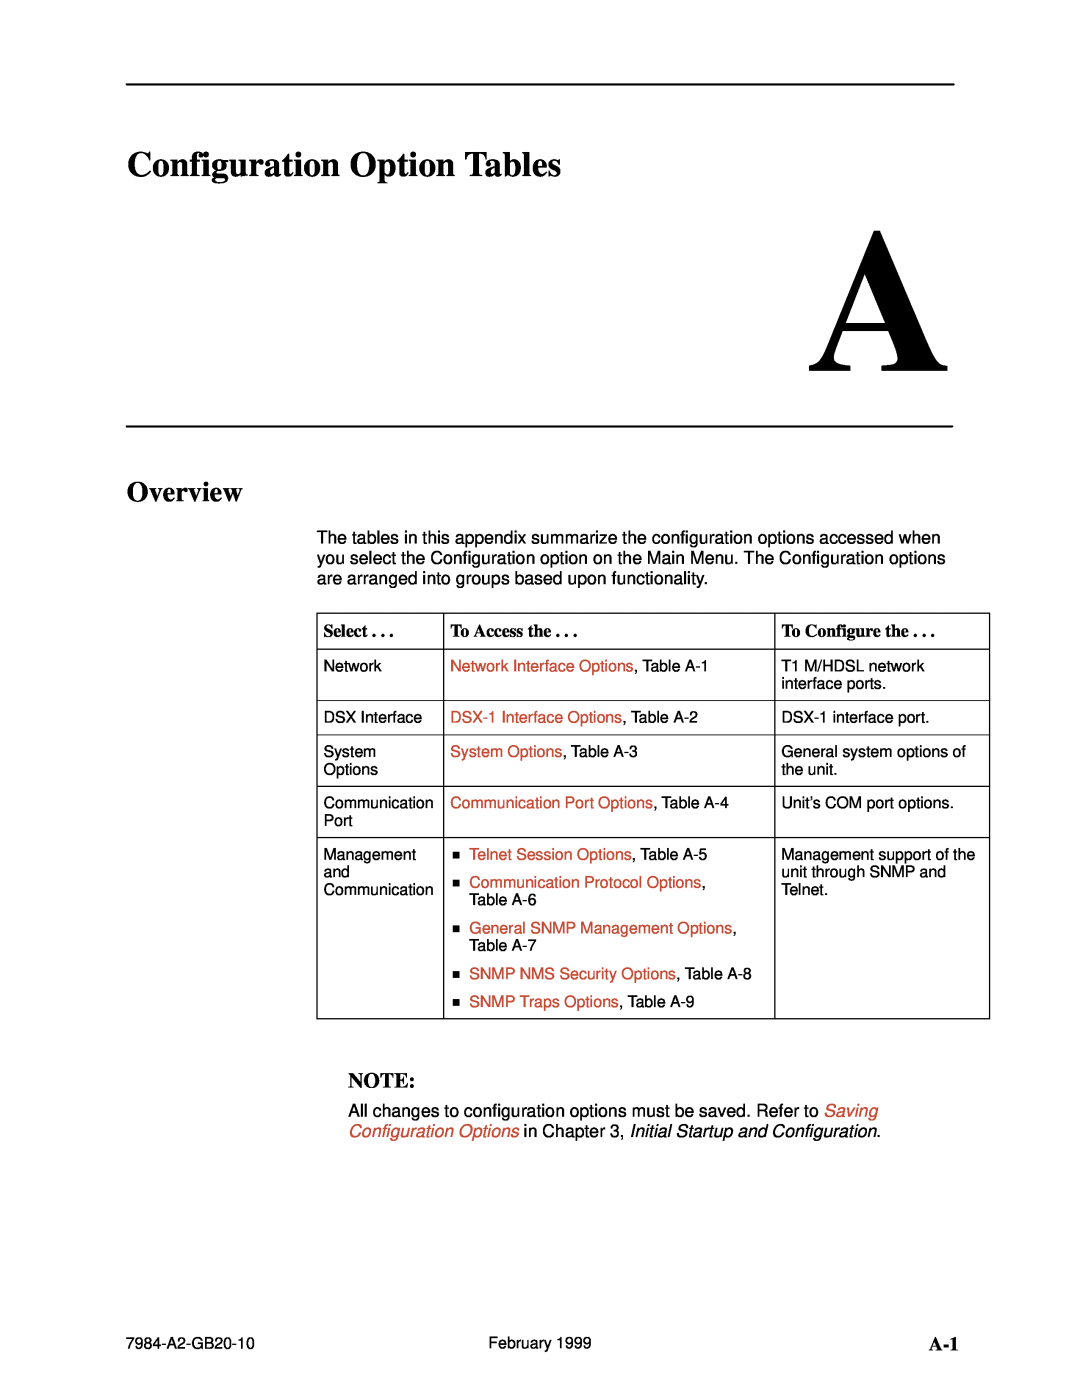 Paradyne Hotwire 7984 Configuration Option Tables, Configuration Options in , Initial Startup and Configuration, Overview 